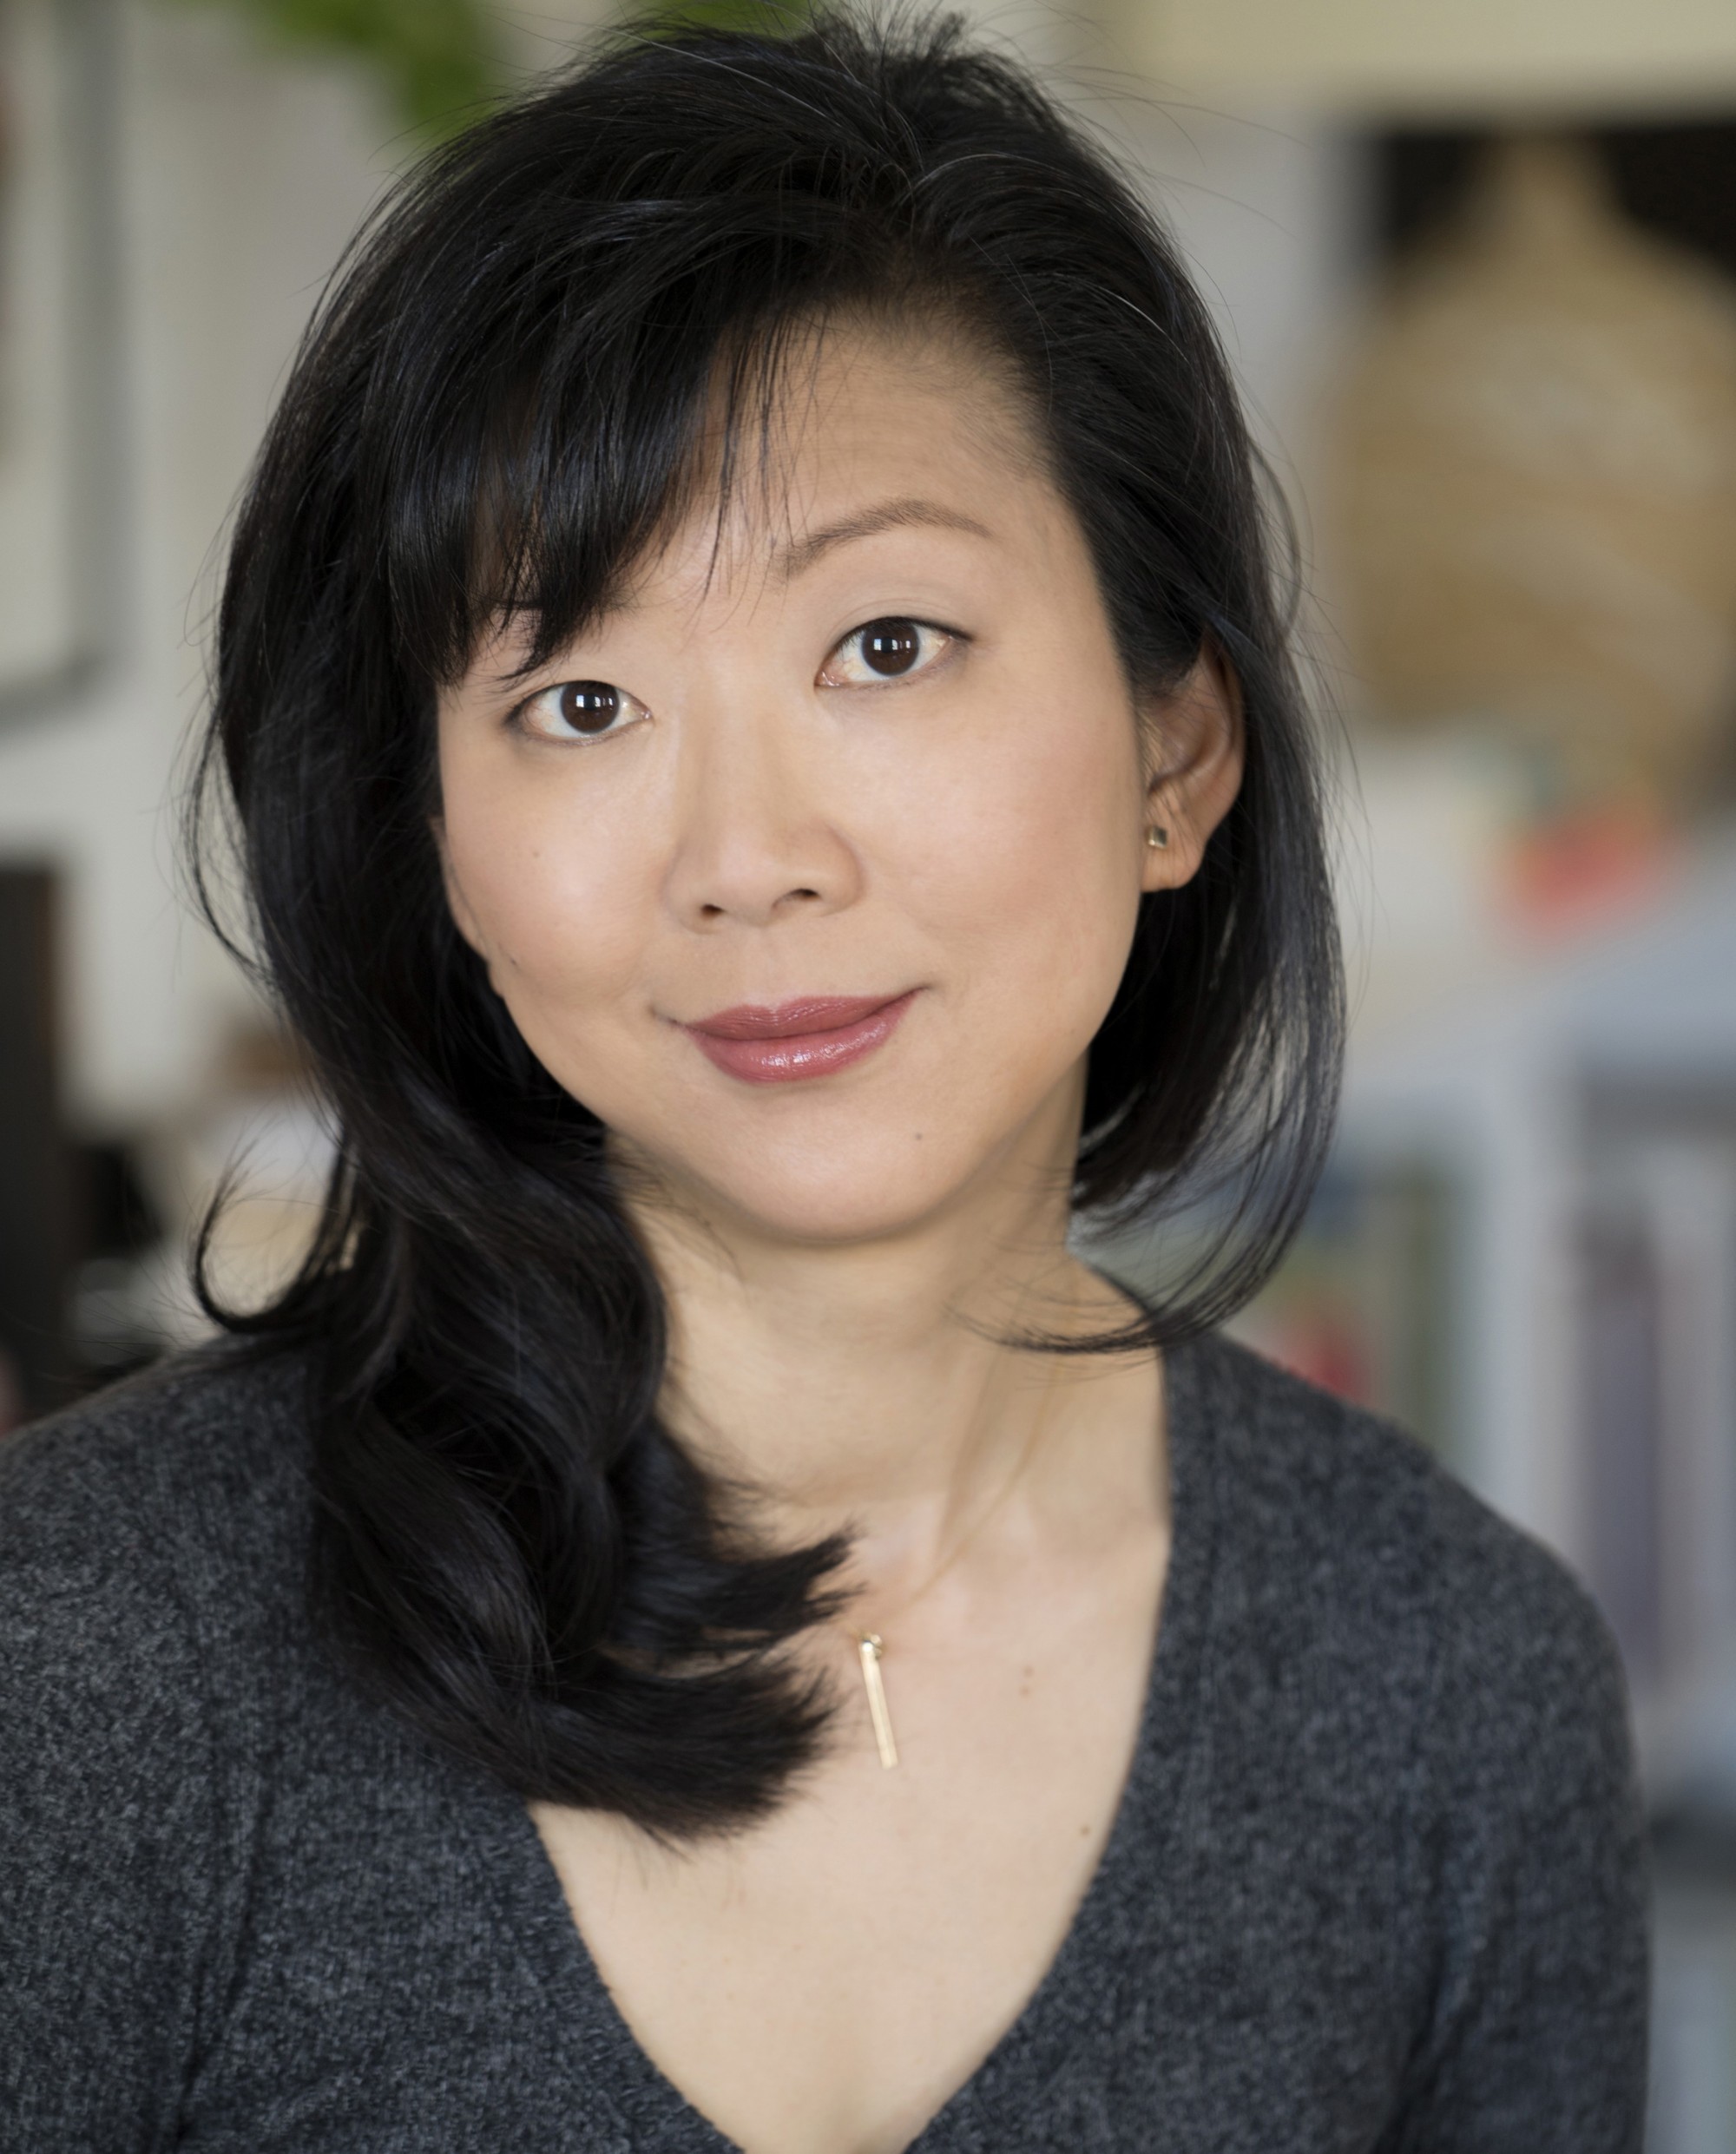 The portrait is cropped from the chest up; Monica Youn is featured center, smiling, wearing a grey heathered shirt and gold necklace. The background of the portrait is out of focus.